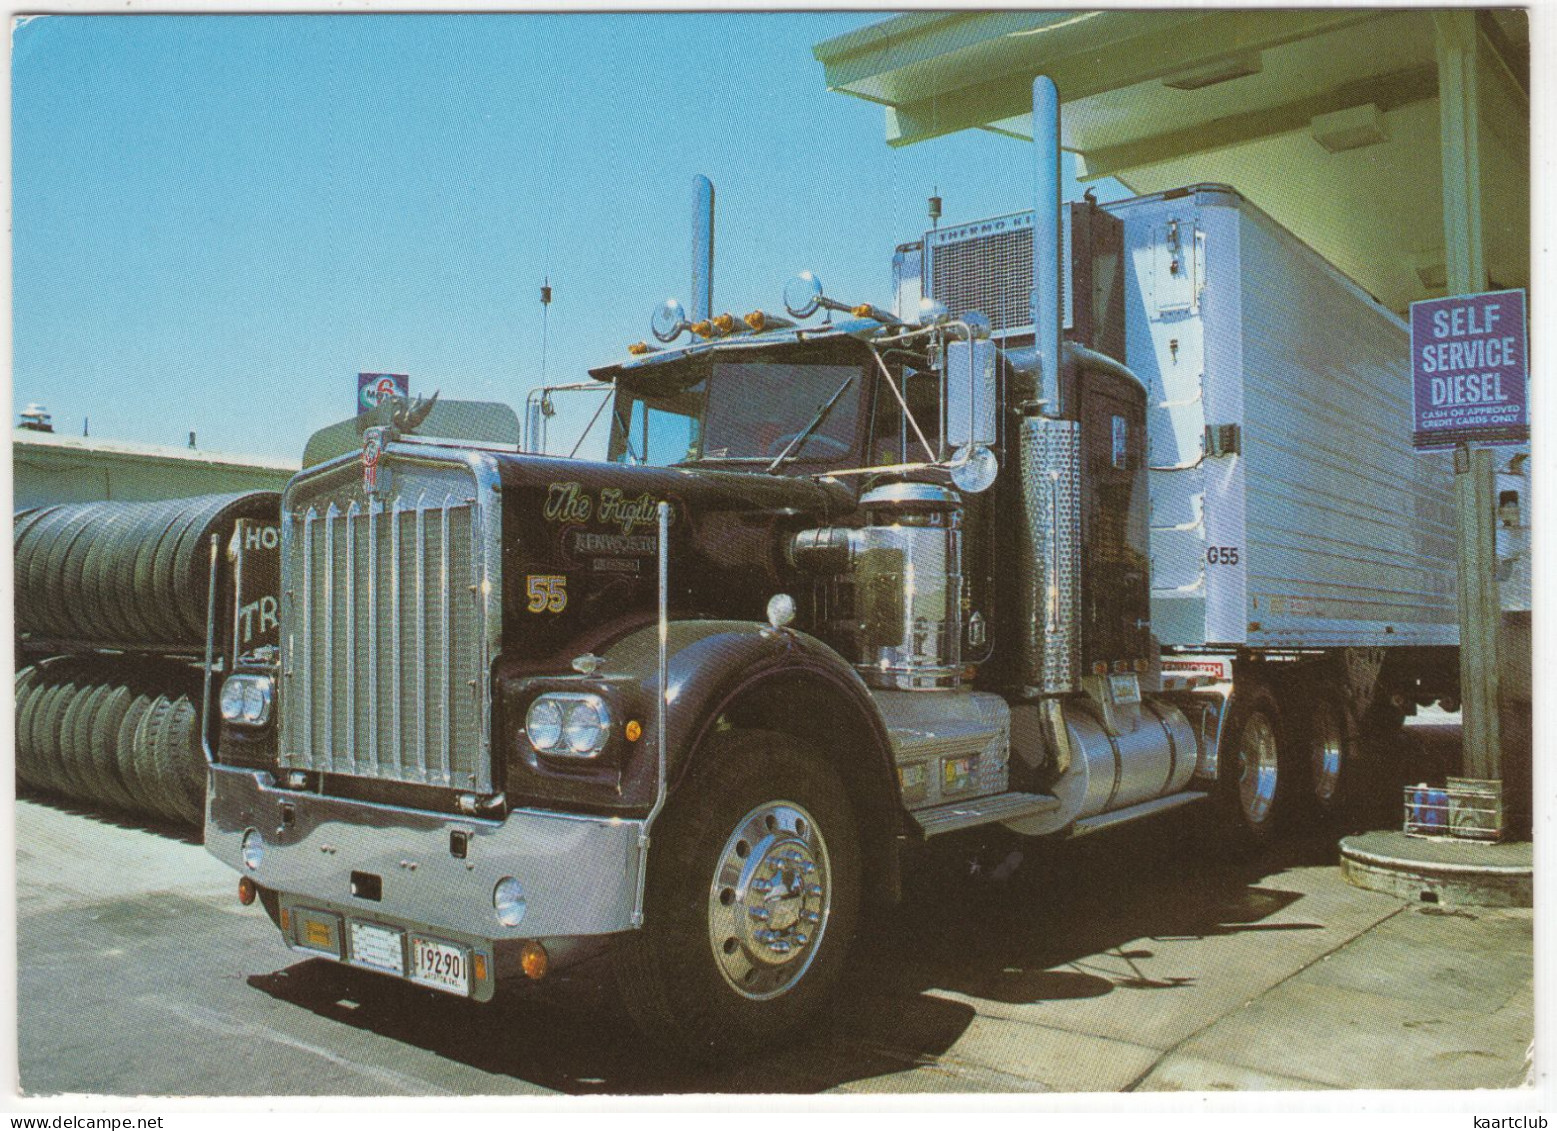 KENWORTH TRUCK - 'The Fugitive' - 'Self-Service-Diesel' Station - (USA) - Camions & Poids Lourds